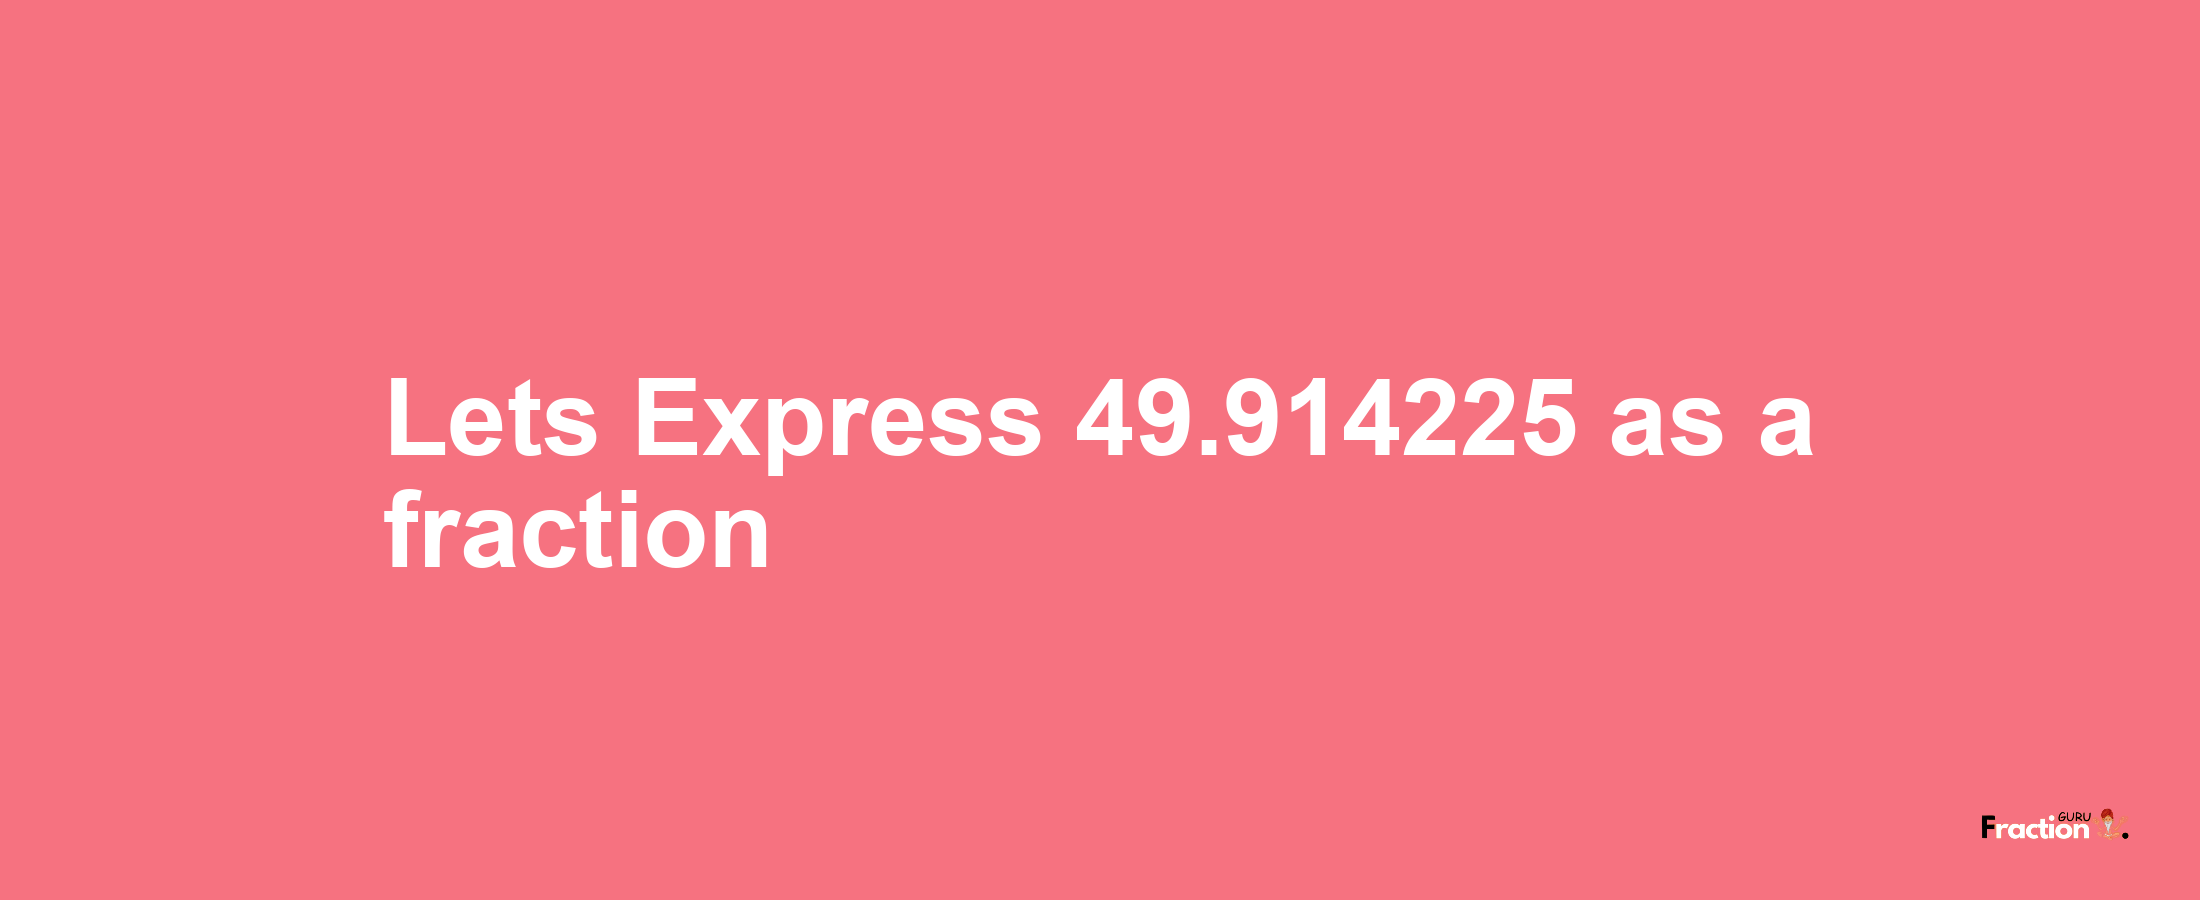 Lets Express 49.914225 as afraction